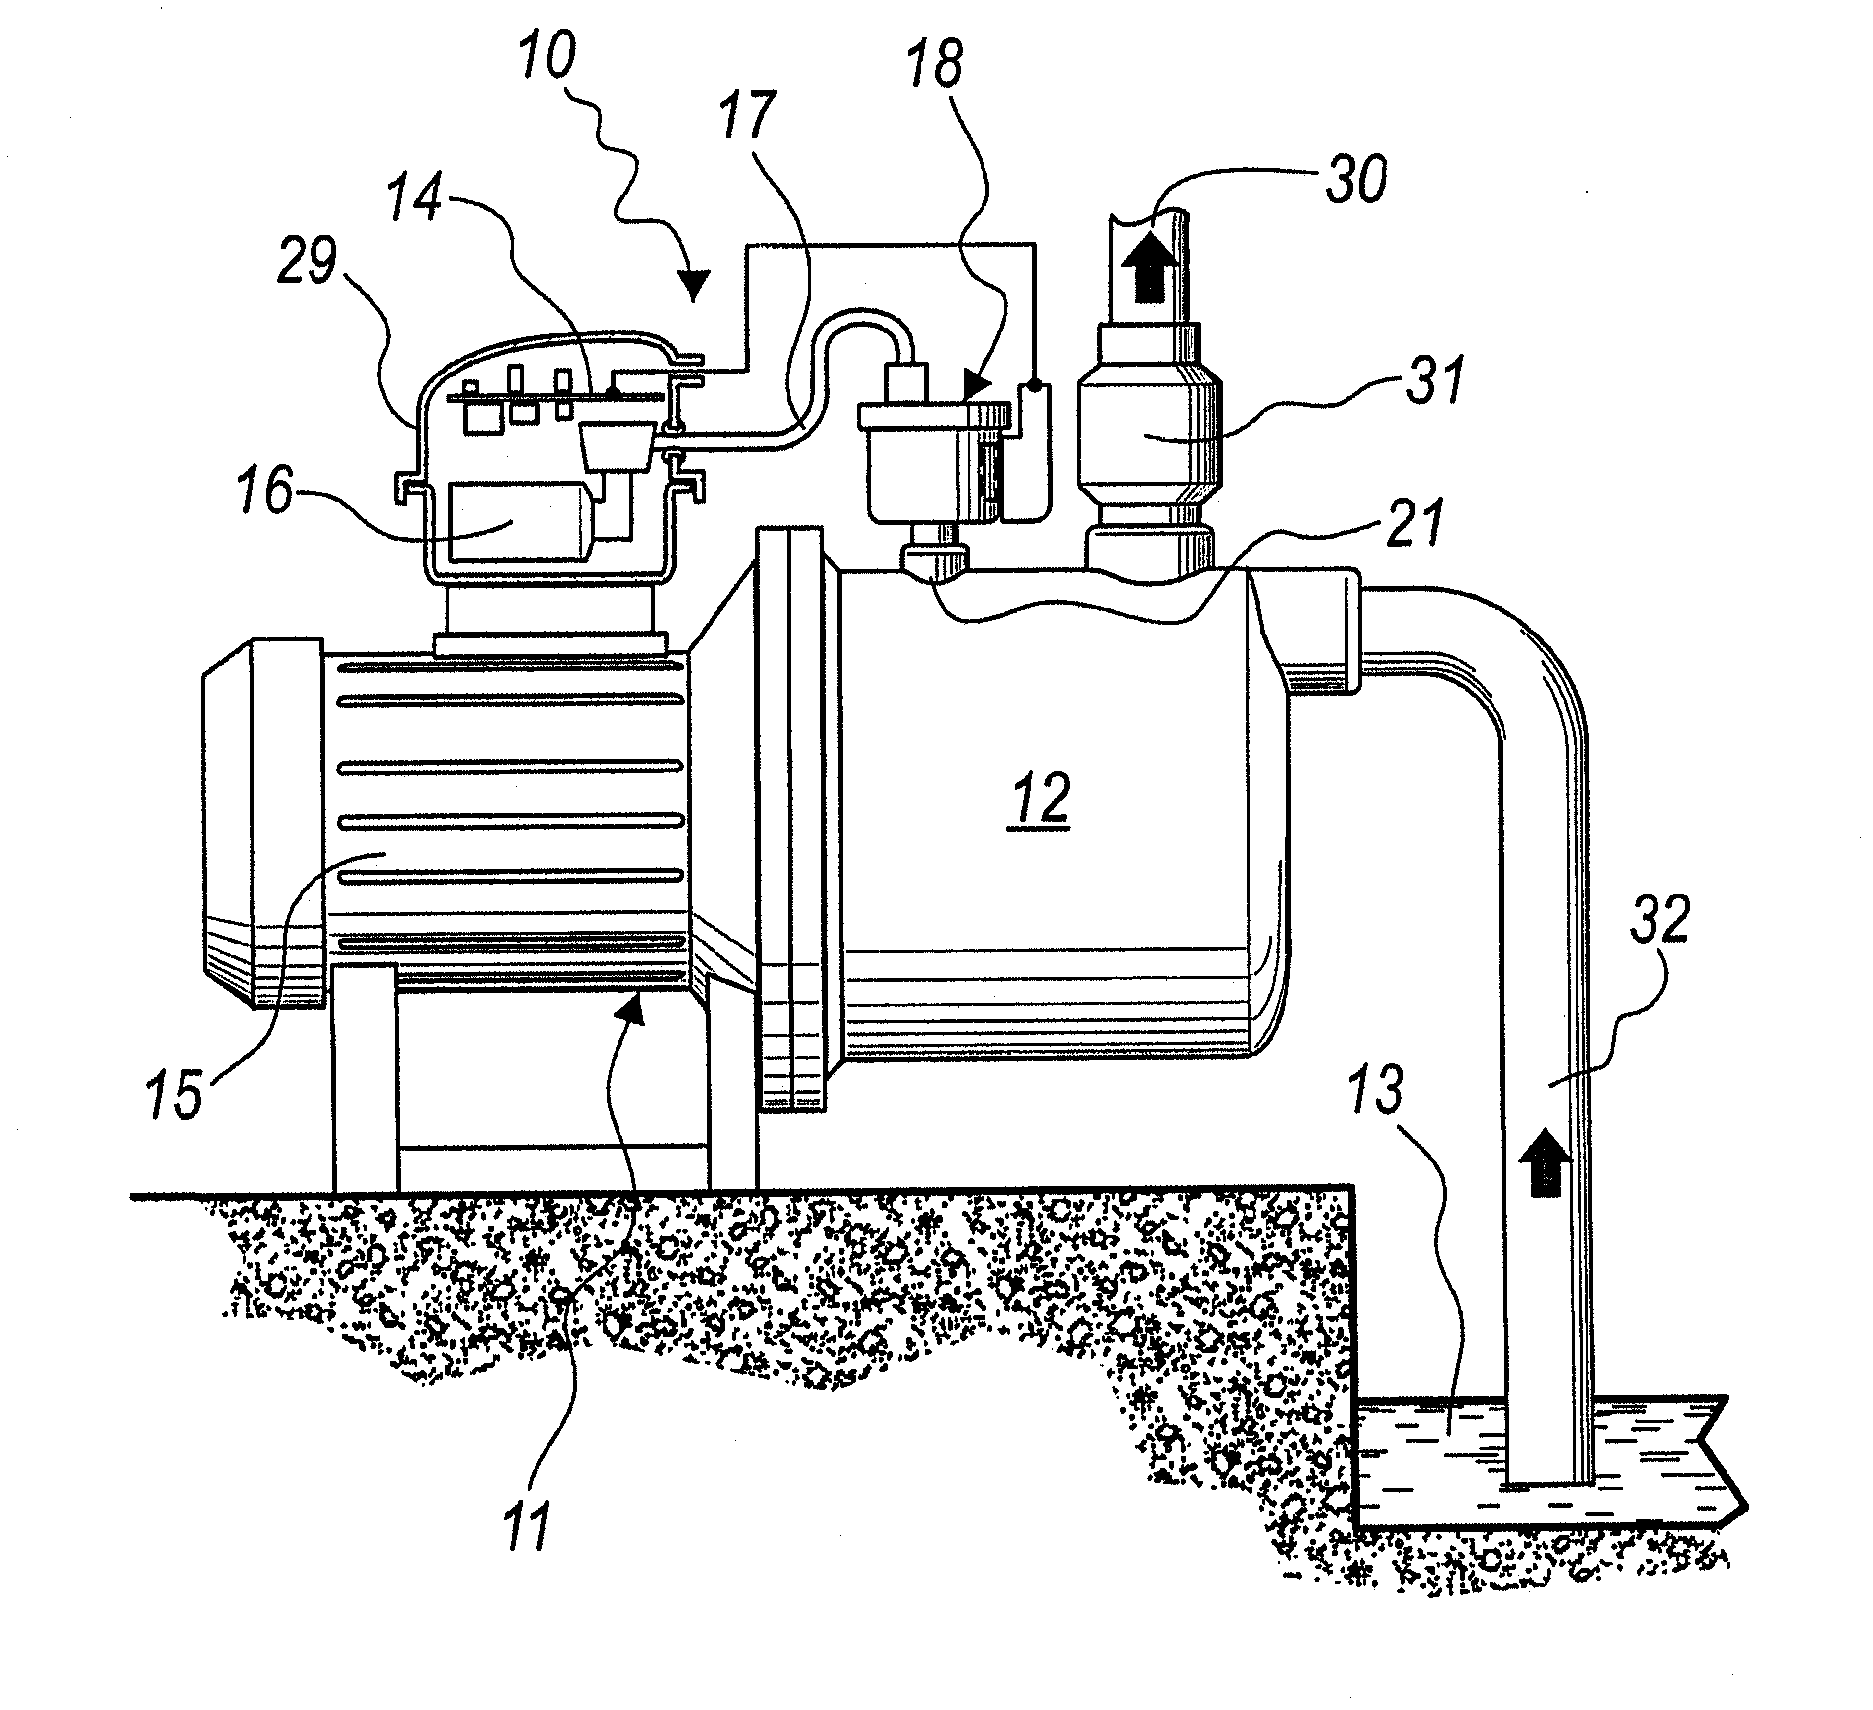 Priming device for electric pumps